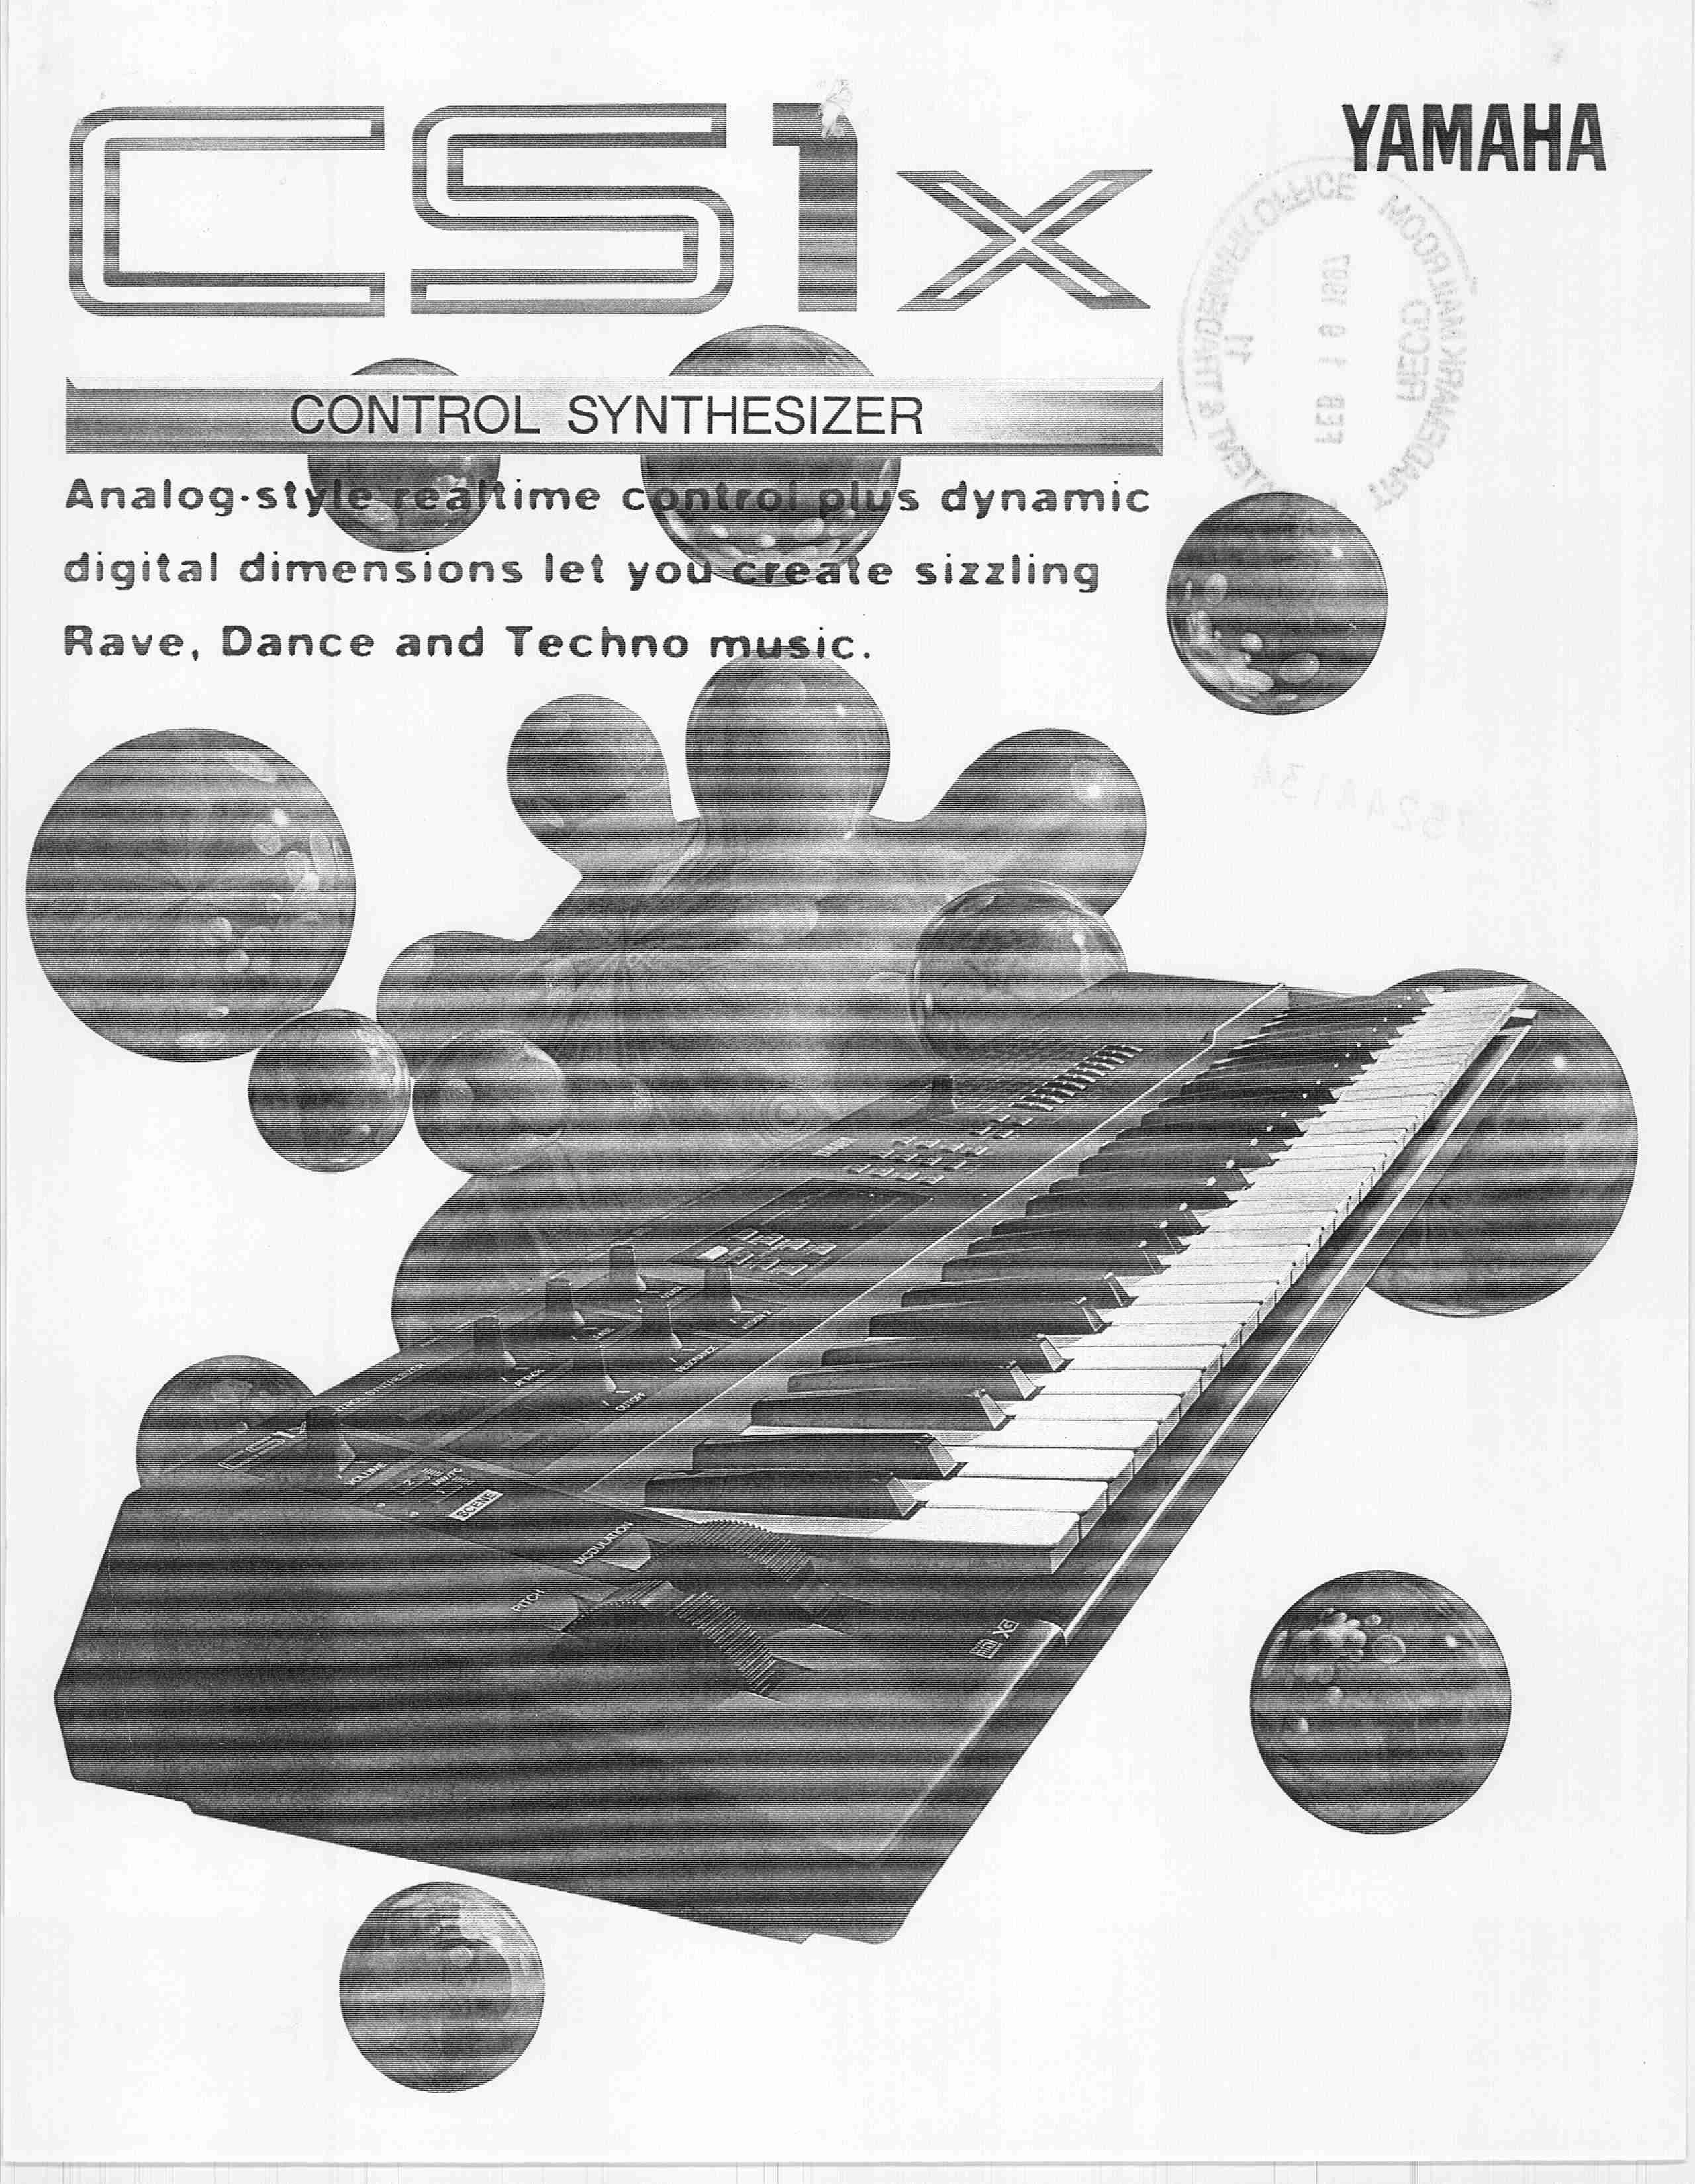  CONTROL SYNTHESIZER